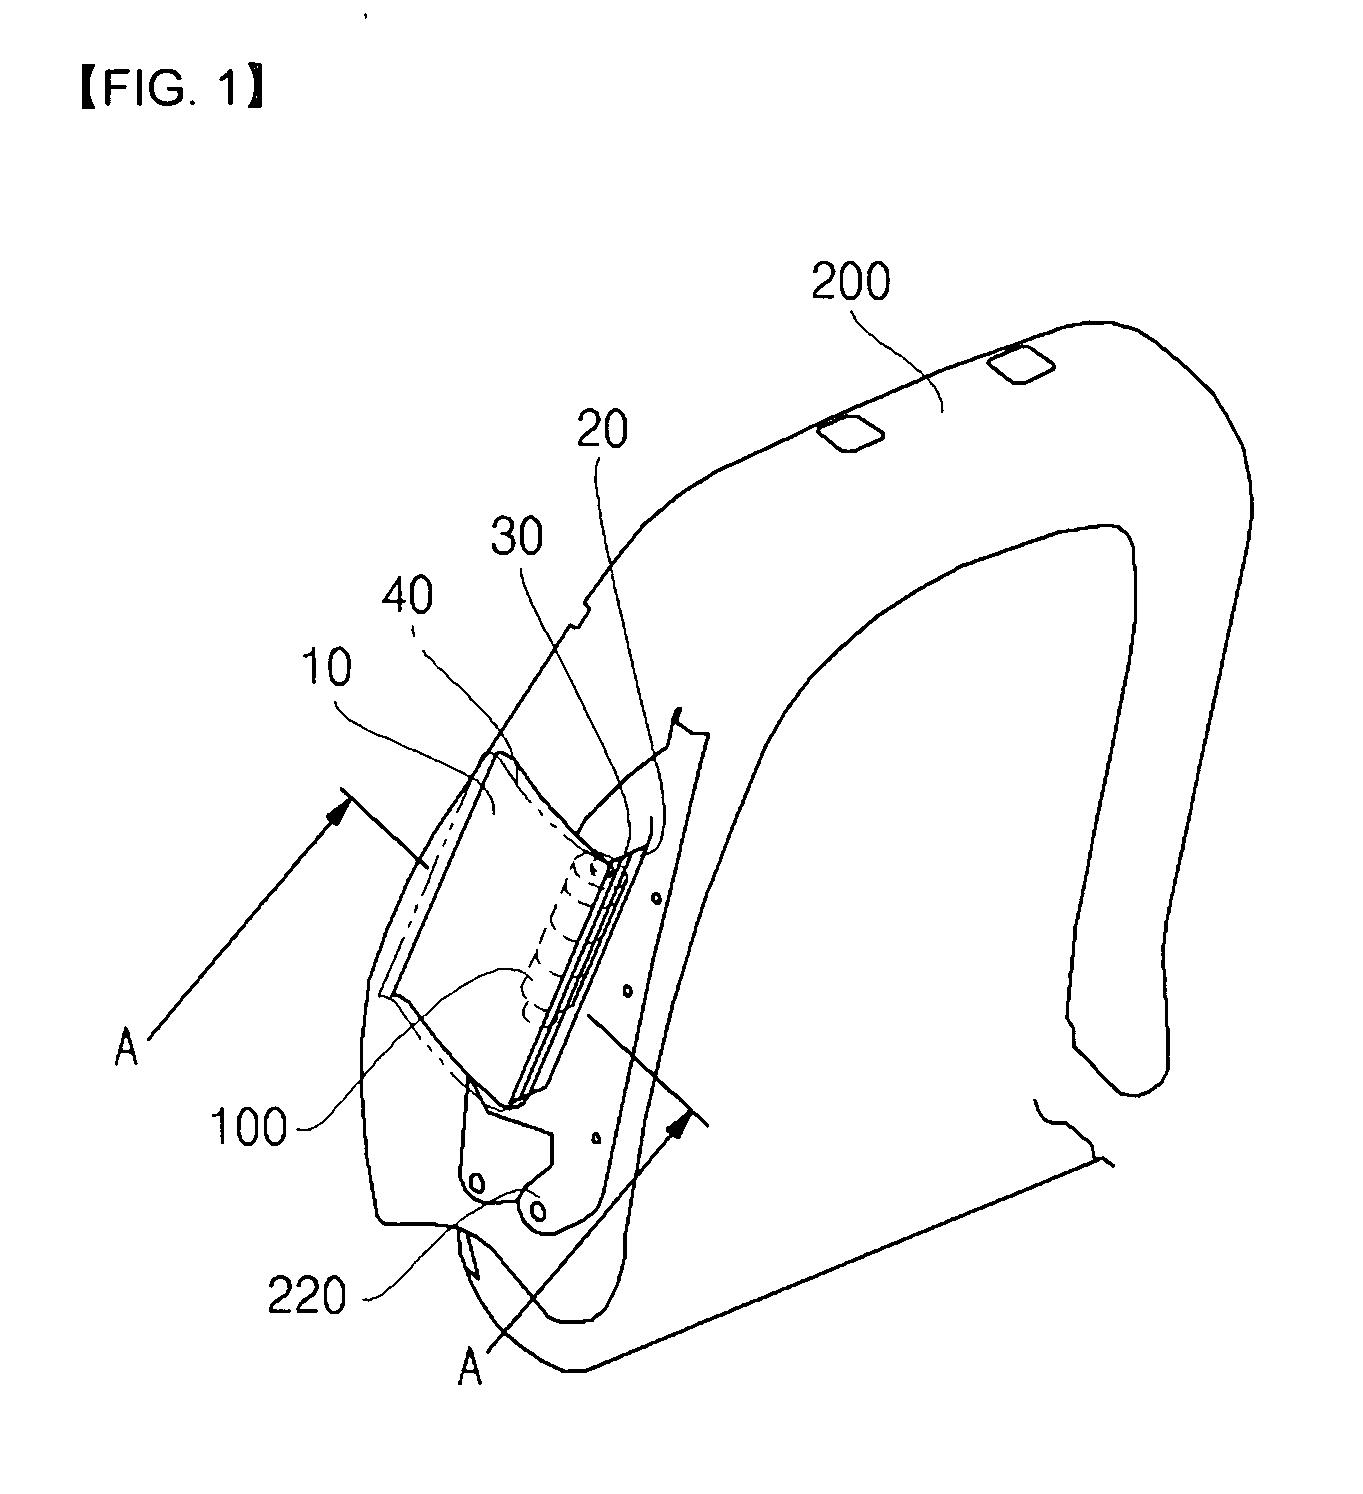 Structure for guiding deploy of side airbag for seat of vehicle